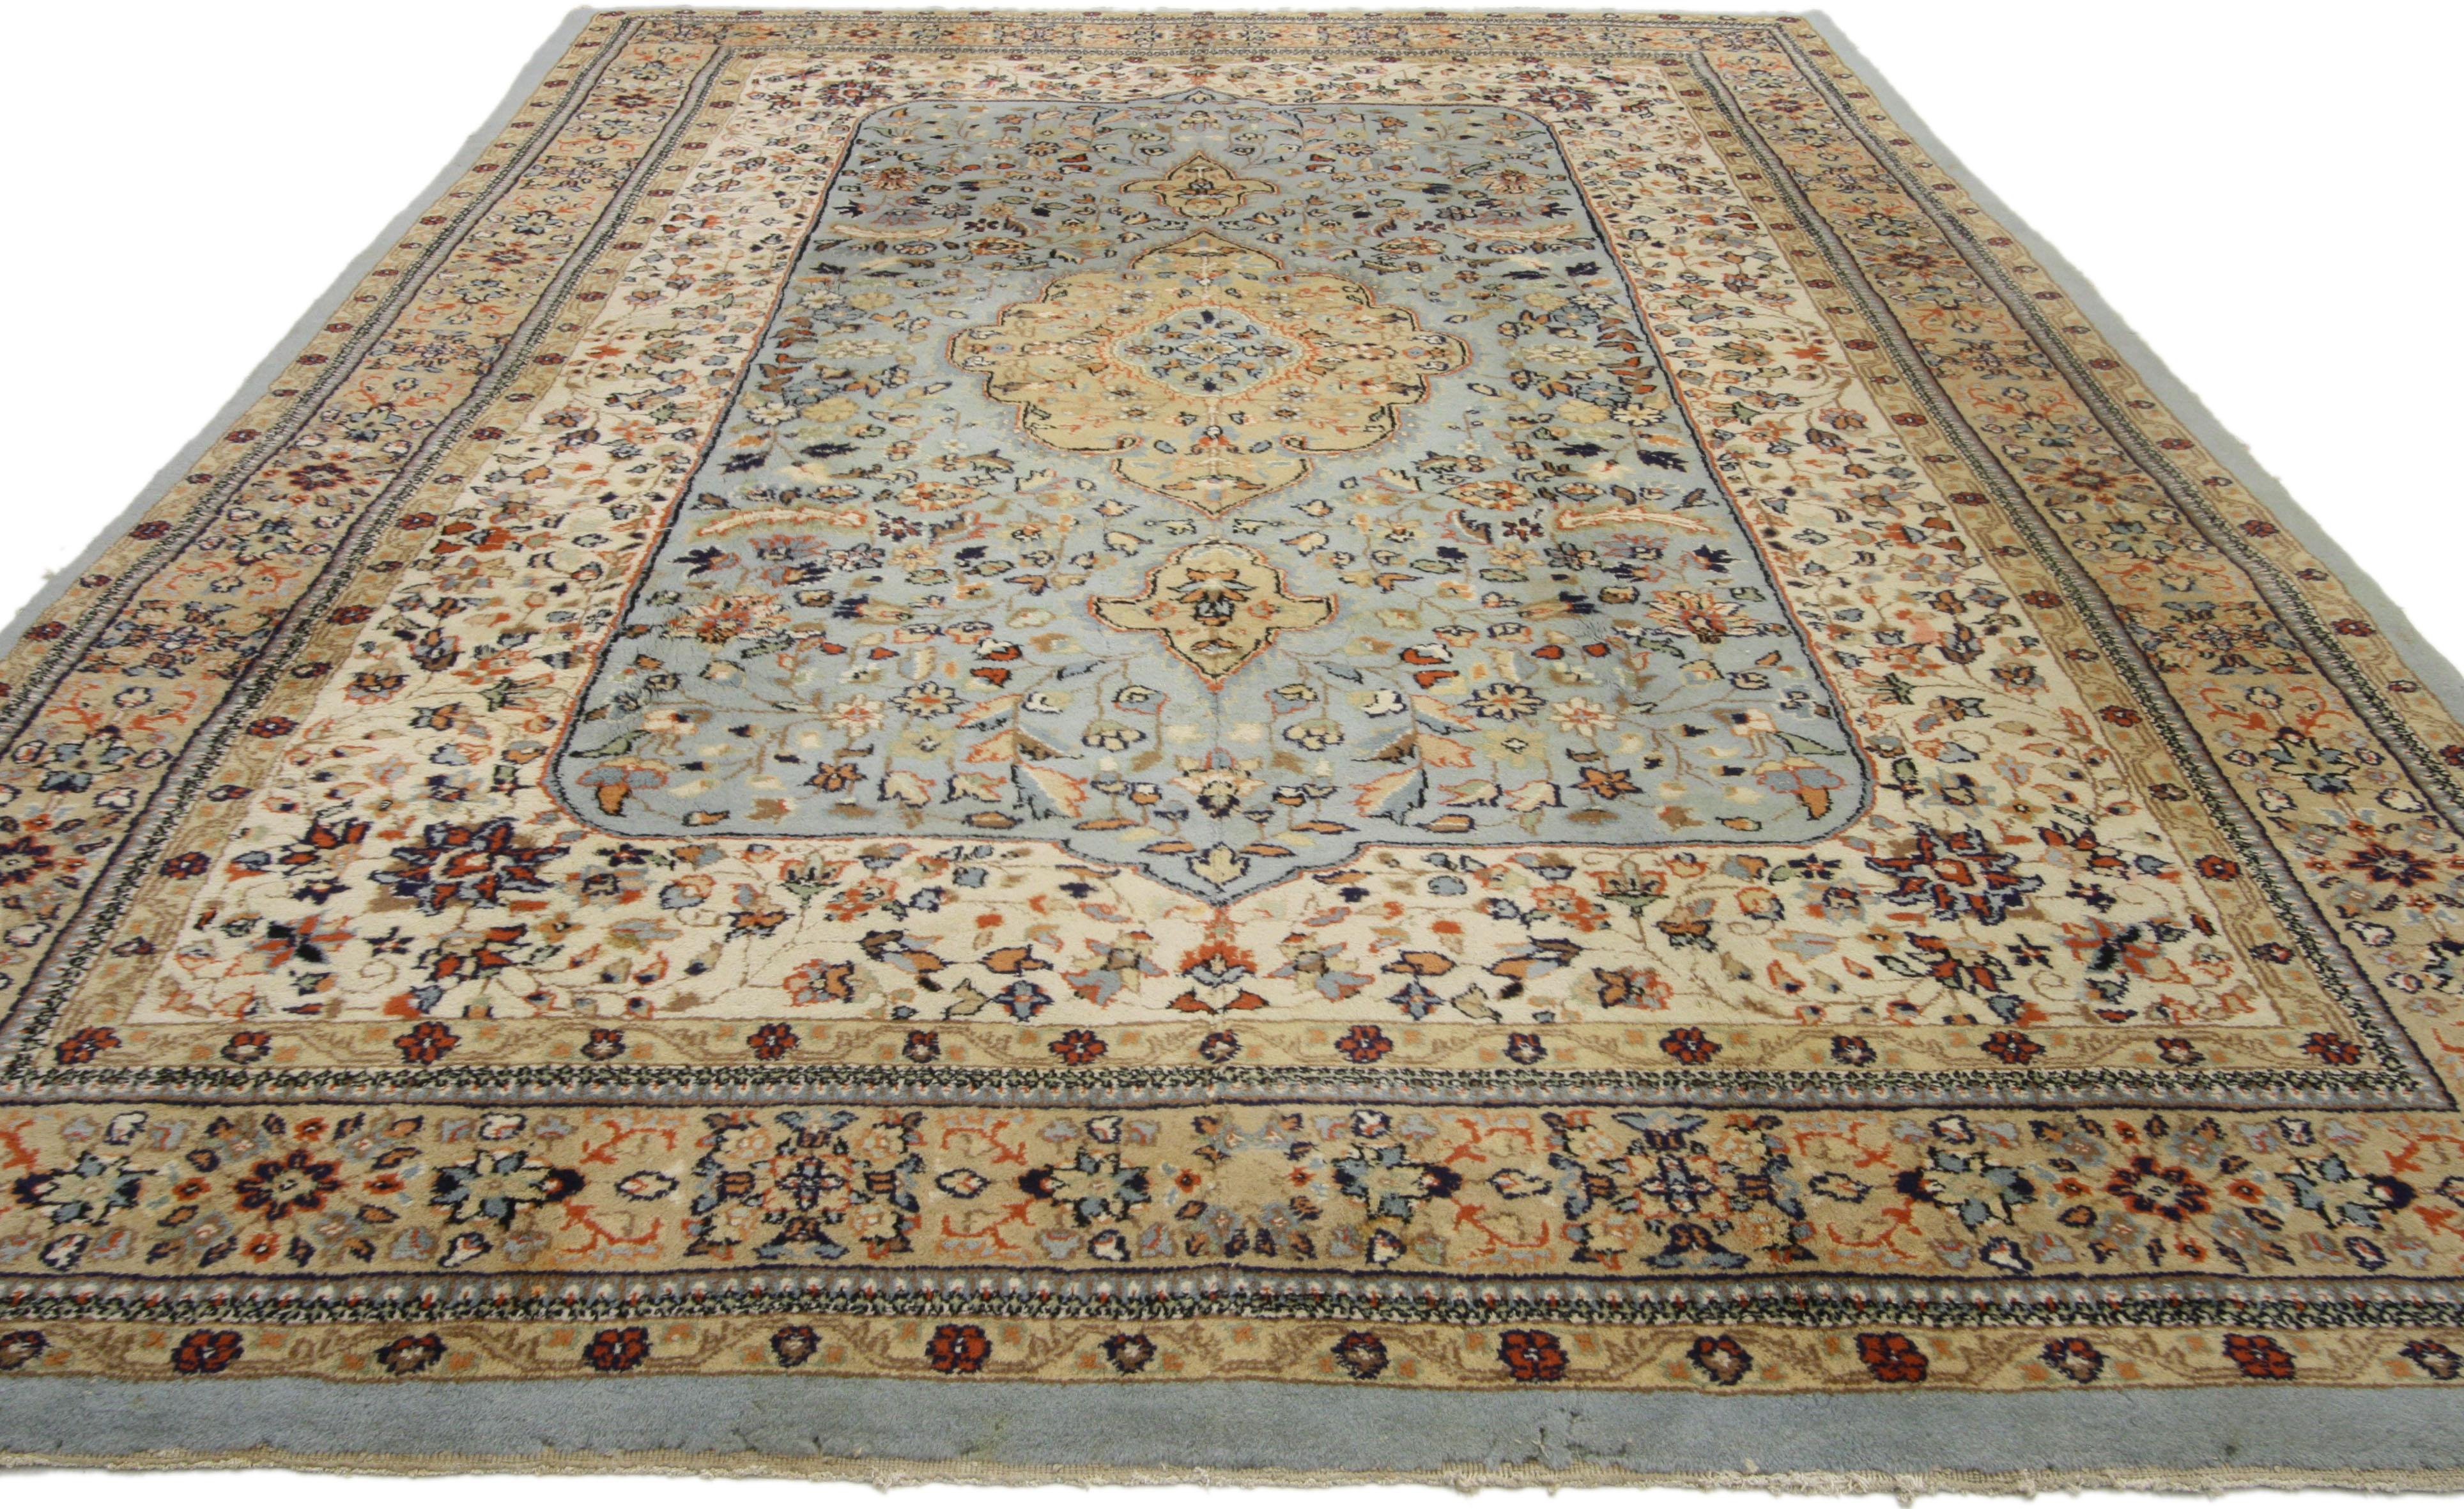 74222 French Country Style Vintage Indo-Persian Design Area Rug 06'00 x 09'00. Enchanting with sweet, dainty floral details, this Persian Design Area Rug is the epitome of elegant French Country style. Timeless with nostalgic vibes, this vintage